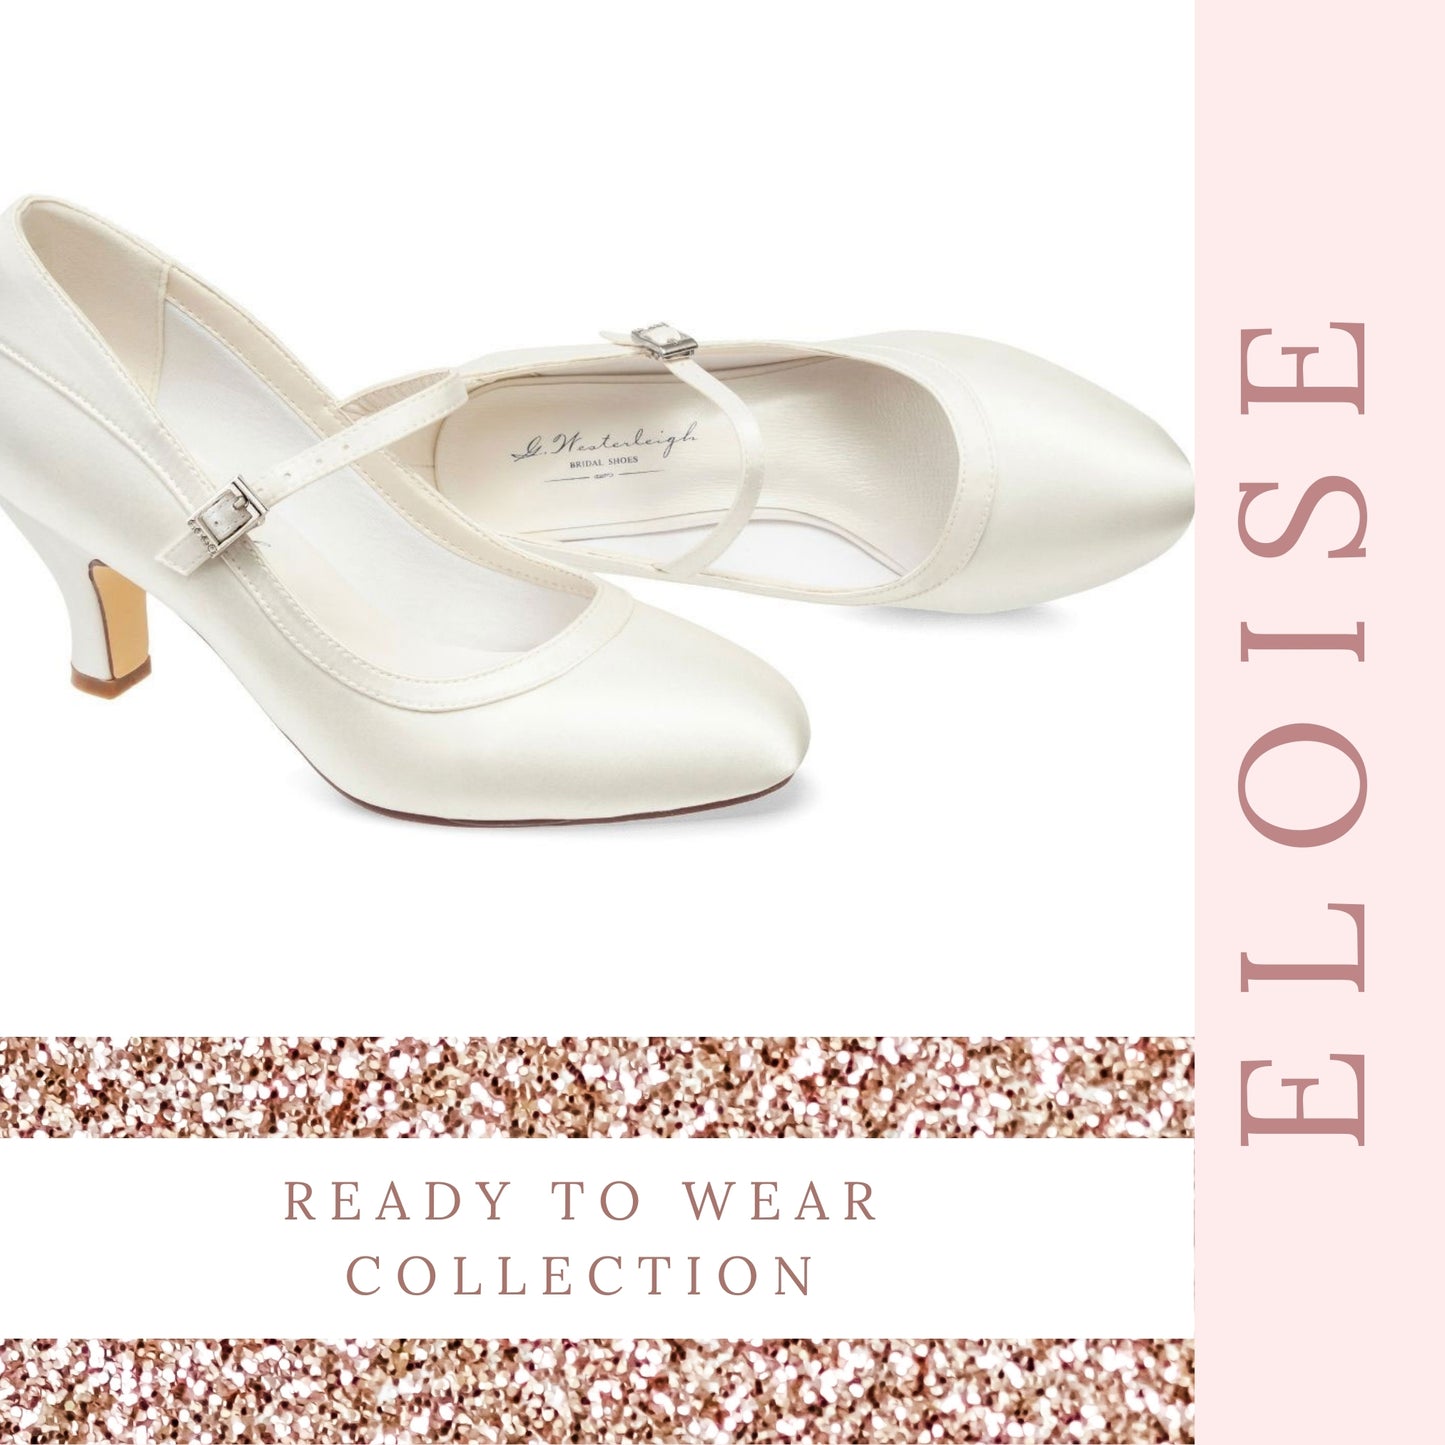 ivory-satin-shoes-low-heel